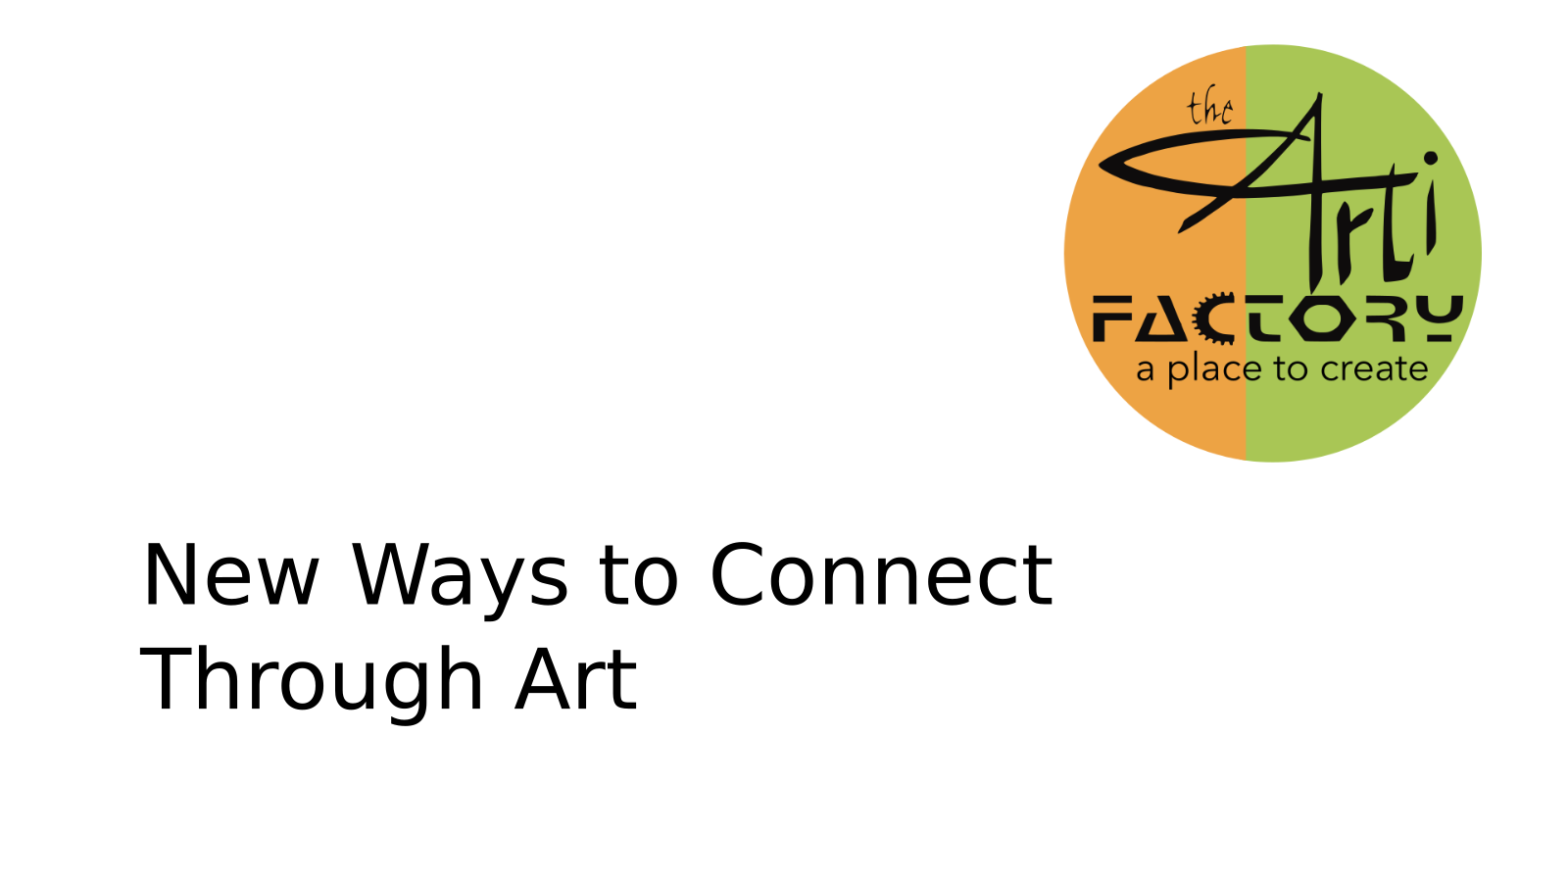 New Ways to Connect Through Art